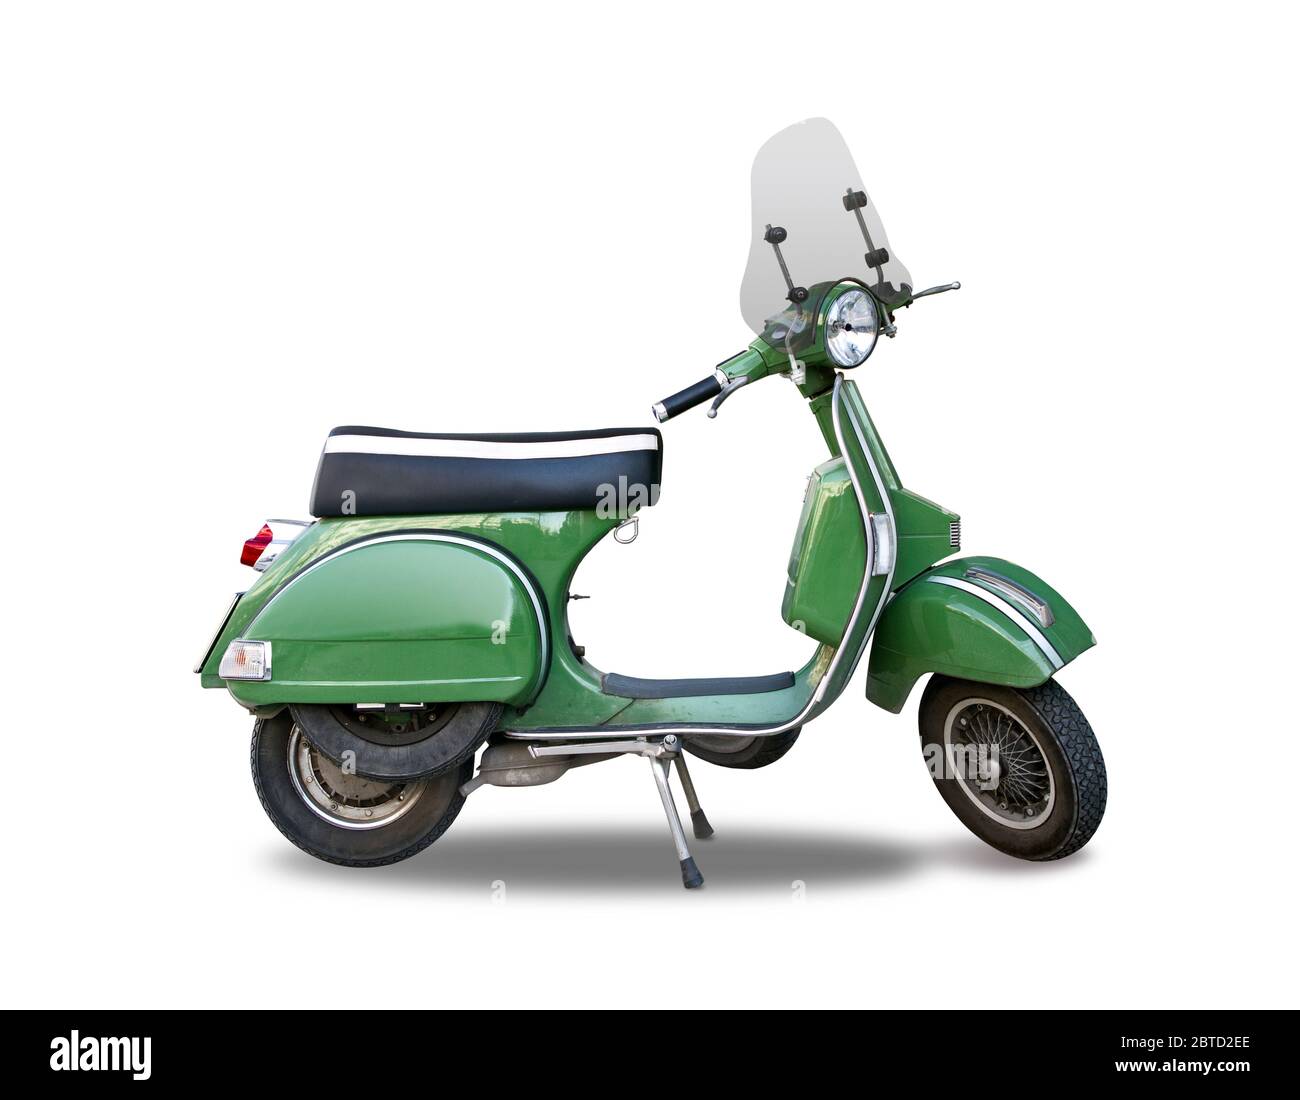 Green Italian classic scooter isolated on white Stock Photo